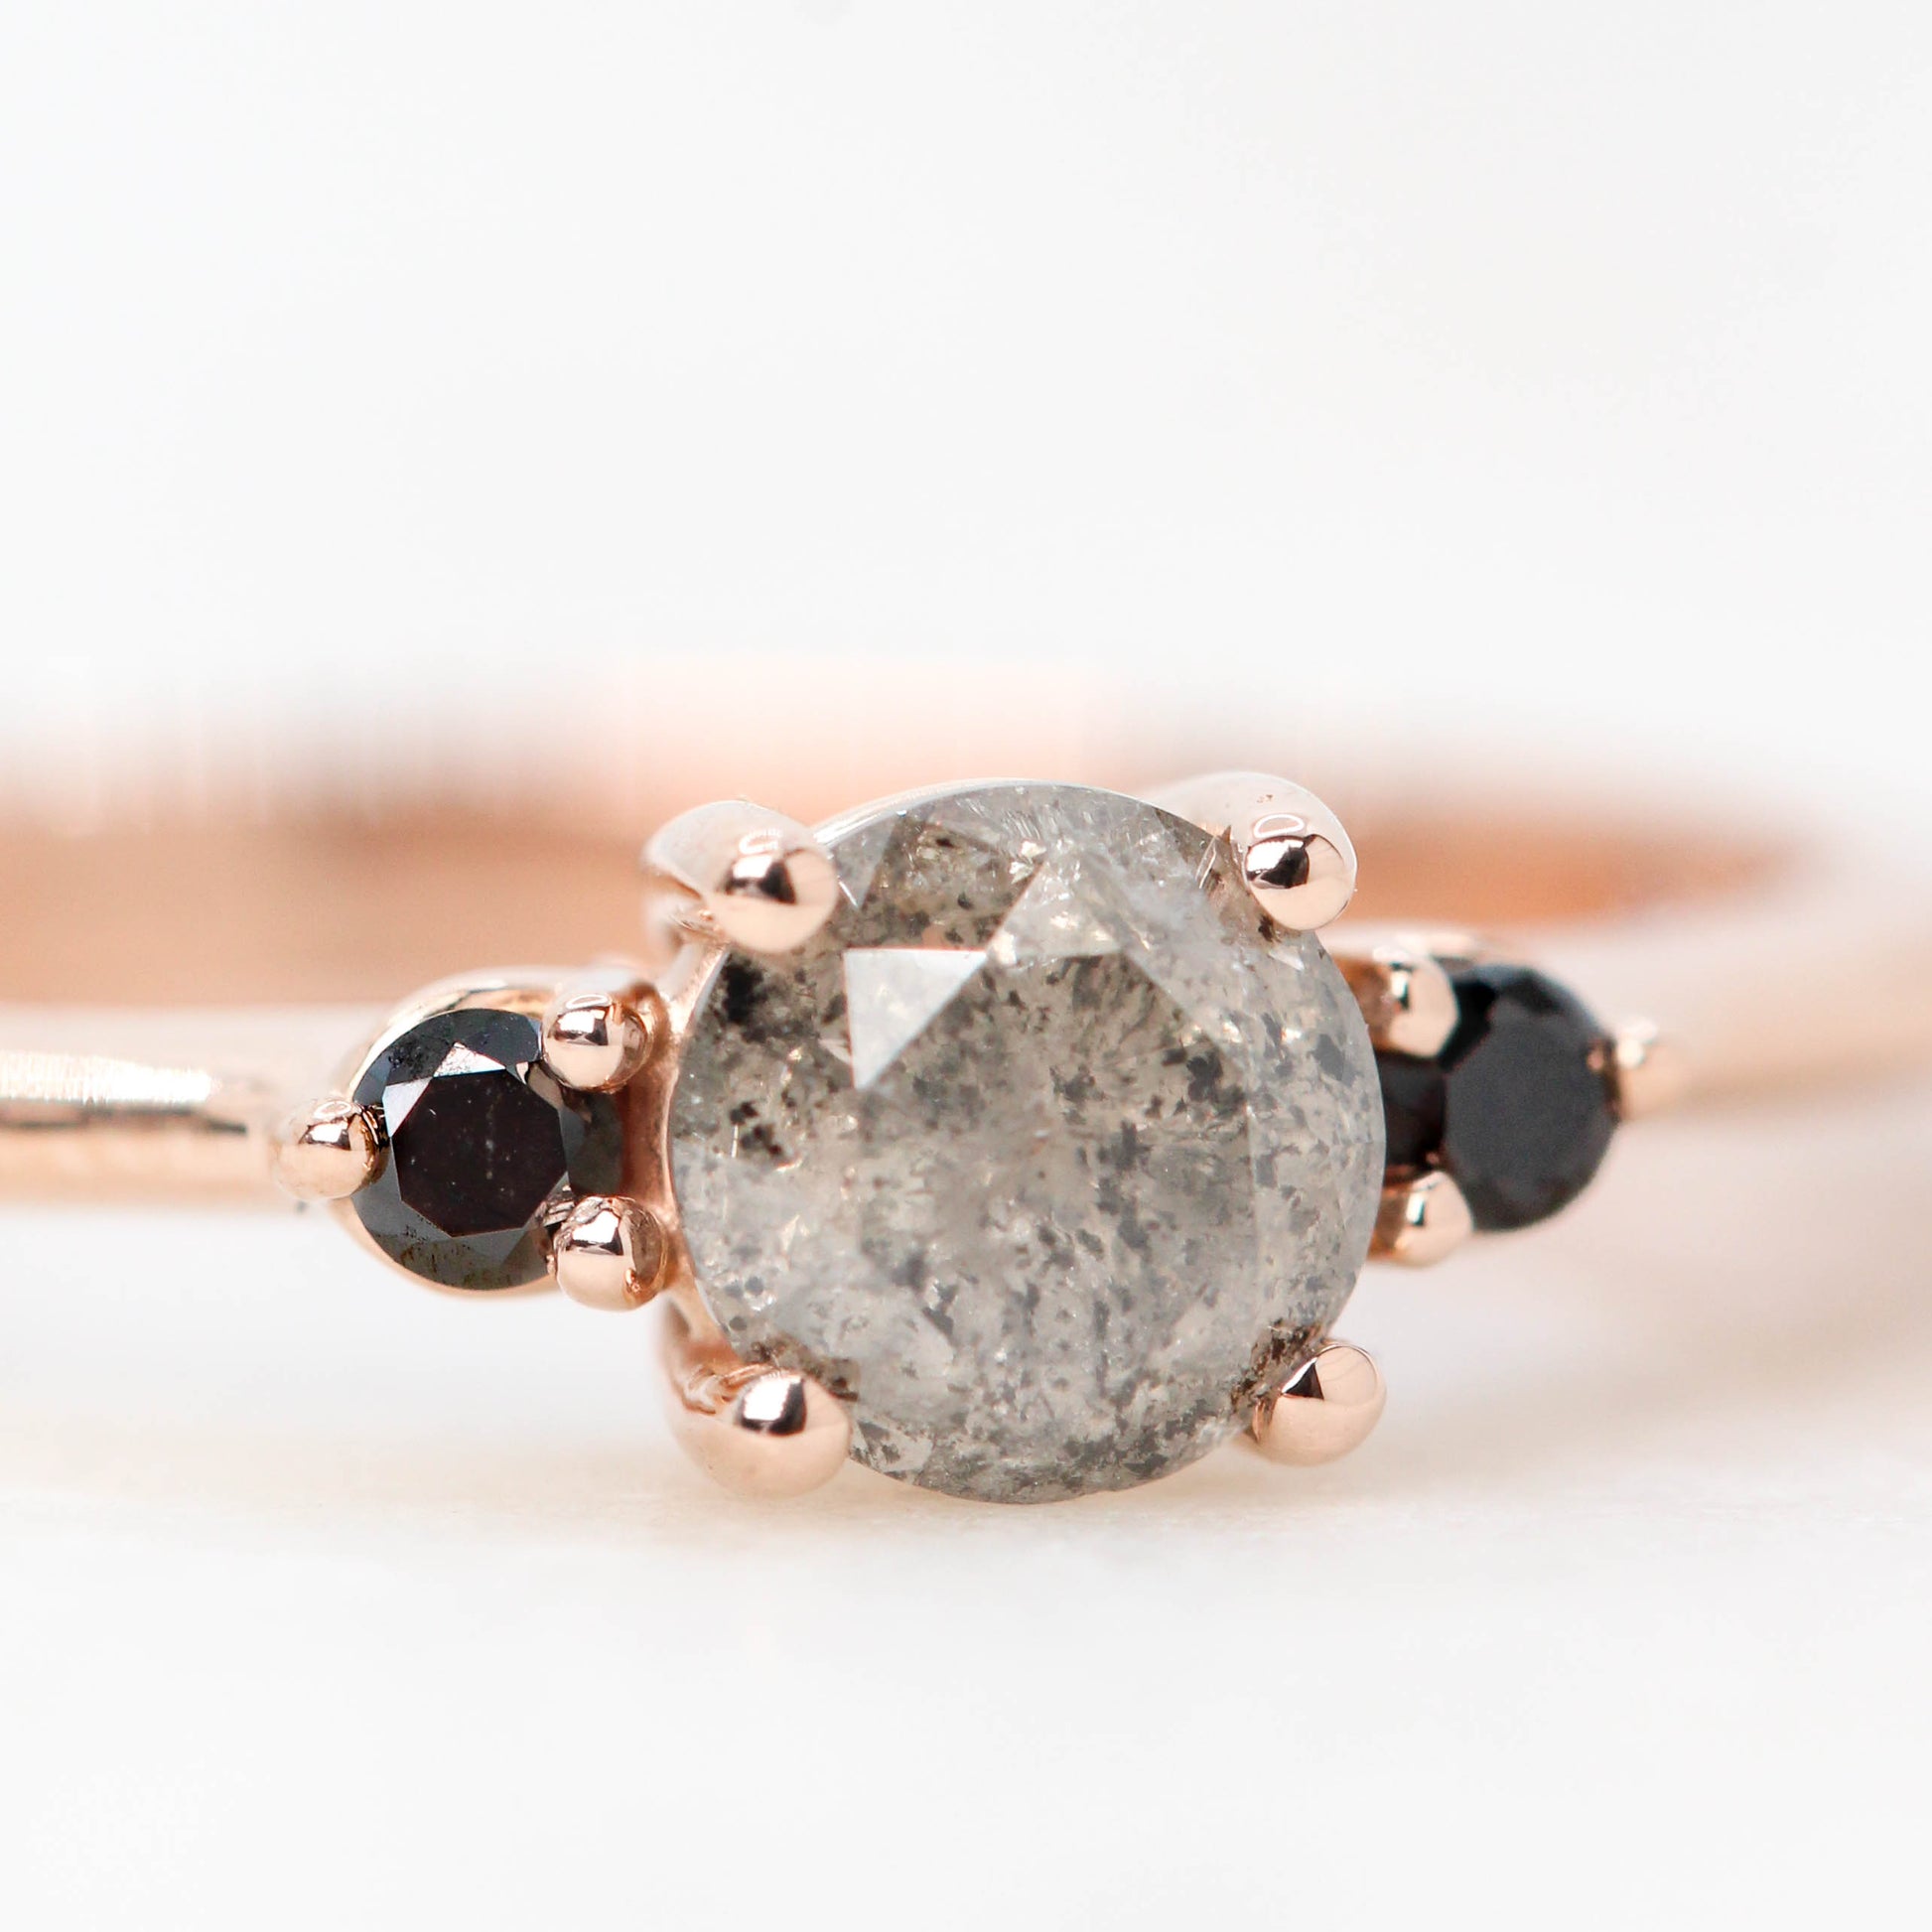 Drea Ring with a 0.55 Carat Gray Celestial Round Diamond and Black Accent Diamonds in 14k Rose Gold - Ready to Size and Ship - Midwinter Co. Alternative Bridal Rings and Modern Fine Jewelry